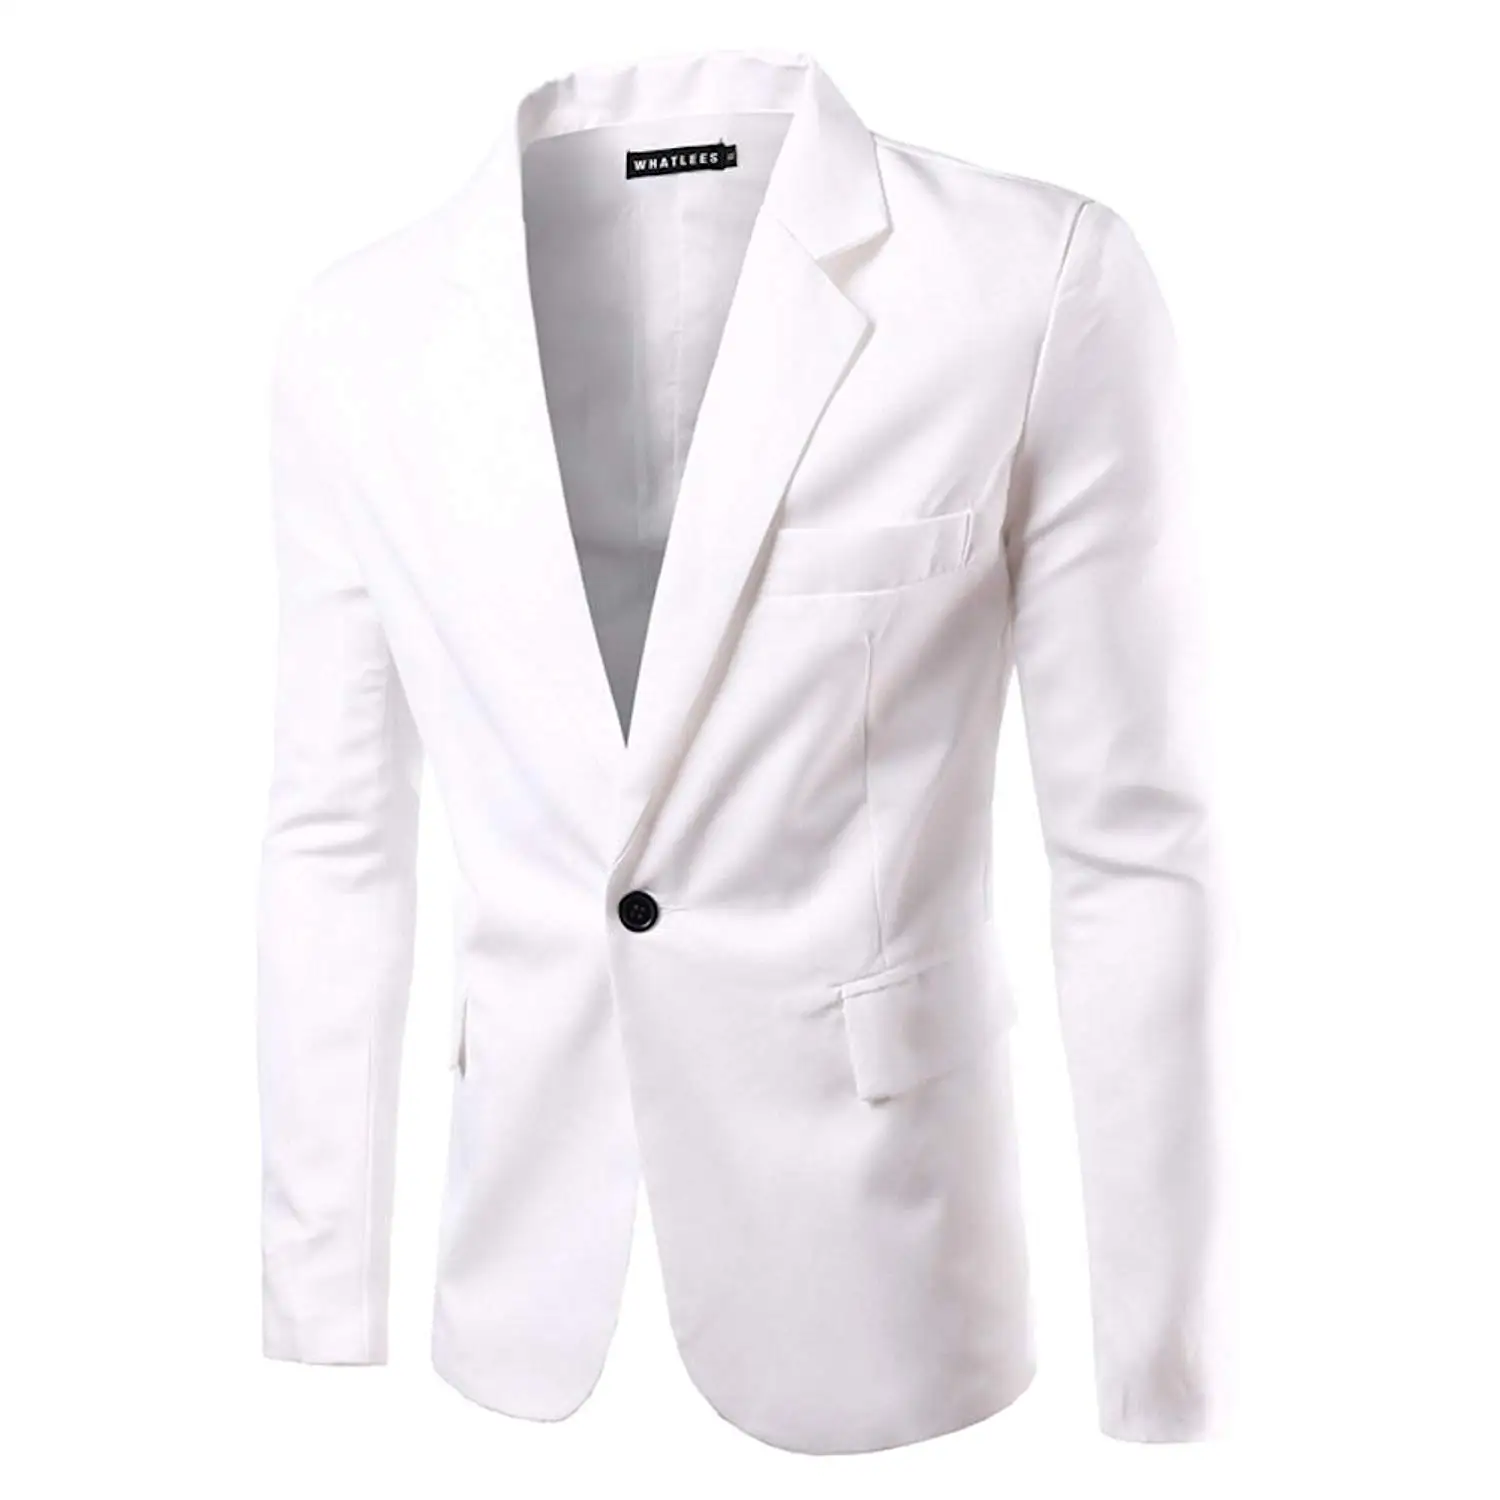 Cheap Mens White Suits, find Mens White Suits deals on line at Alibaba.com